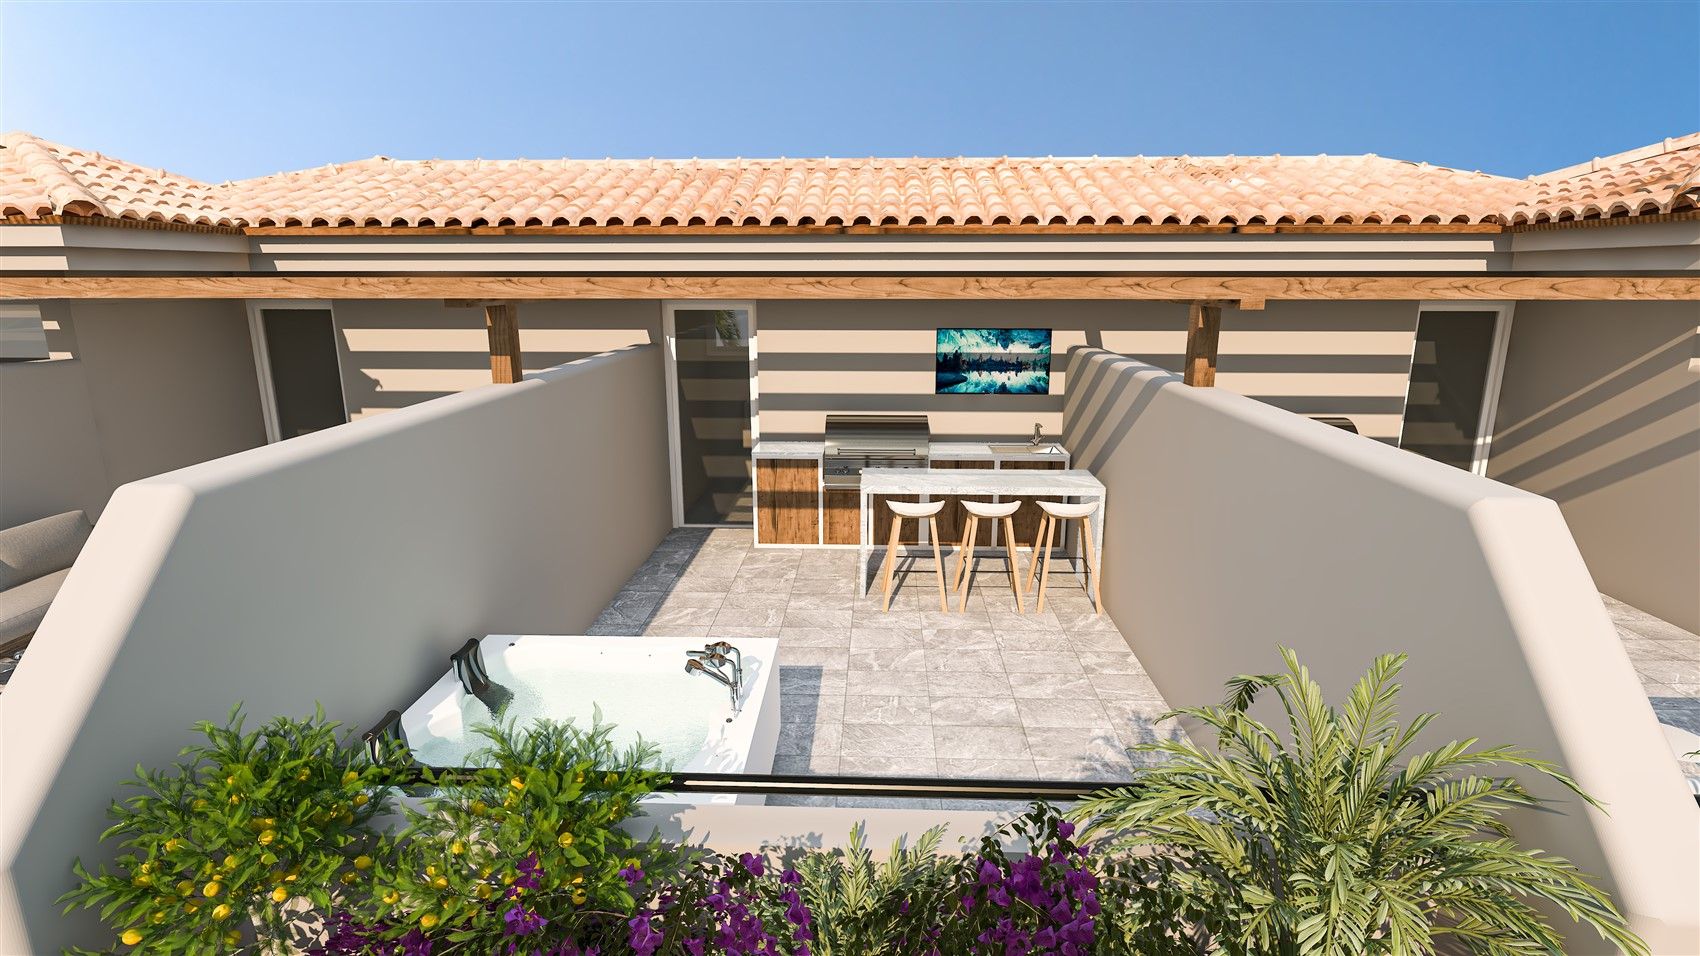 The residential project on a sea coast in the picturesque area of Esentepe